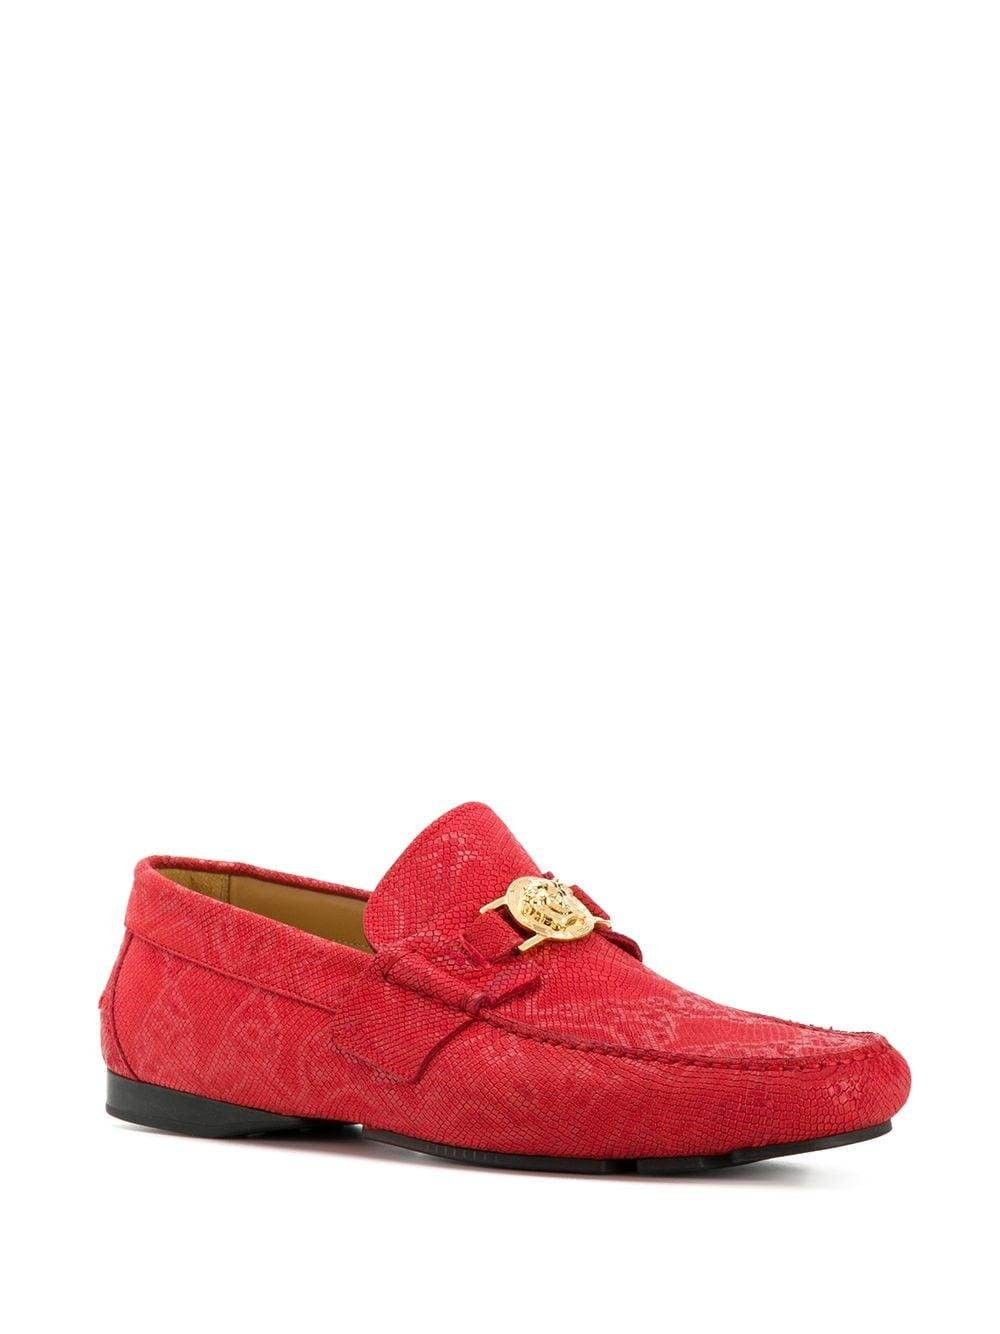 Versace Leather Medusa Loafers in for Men